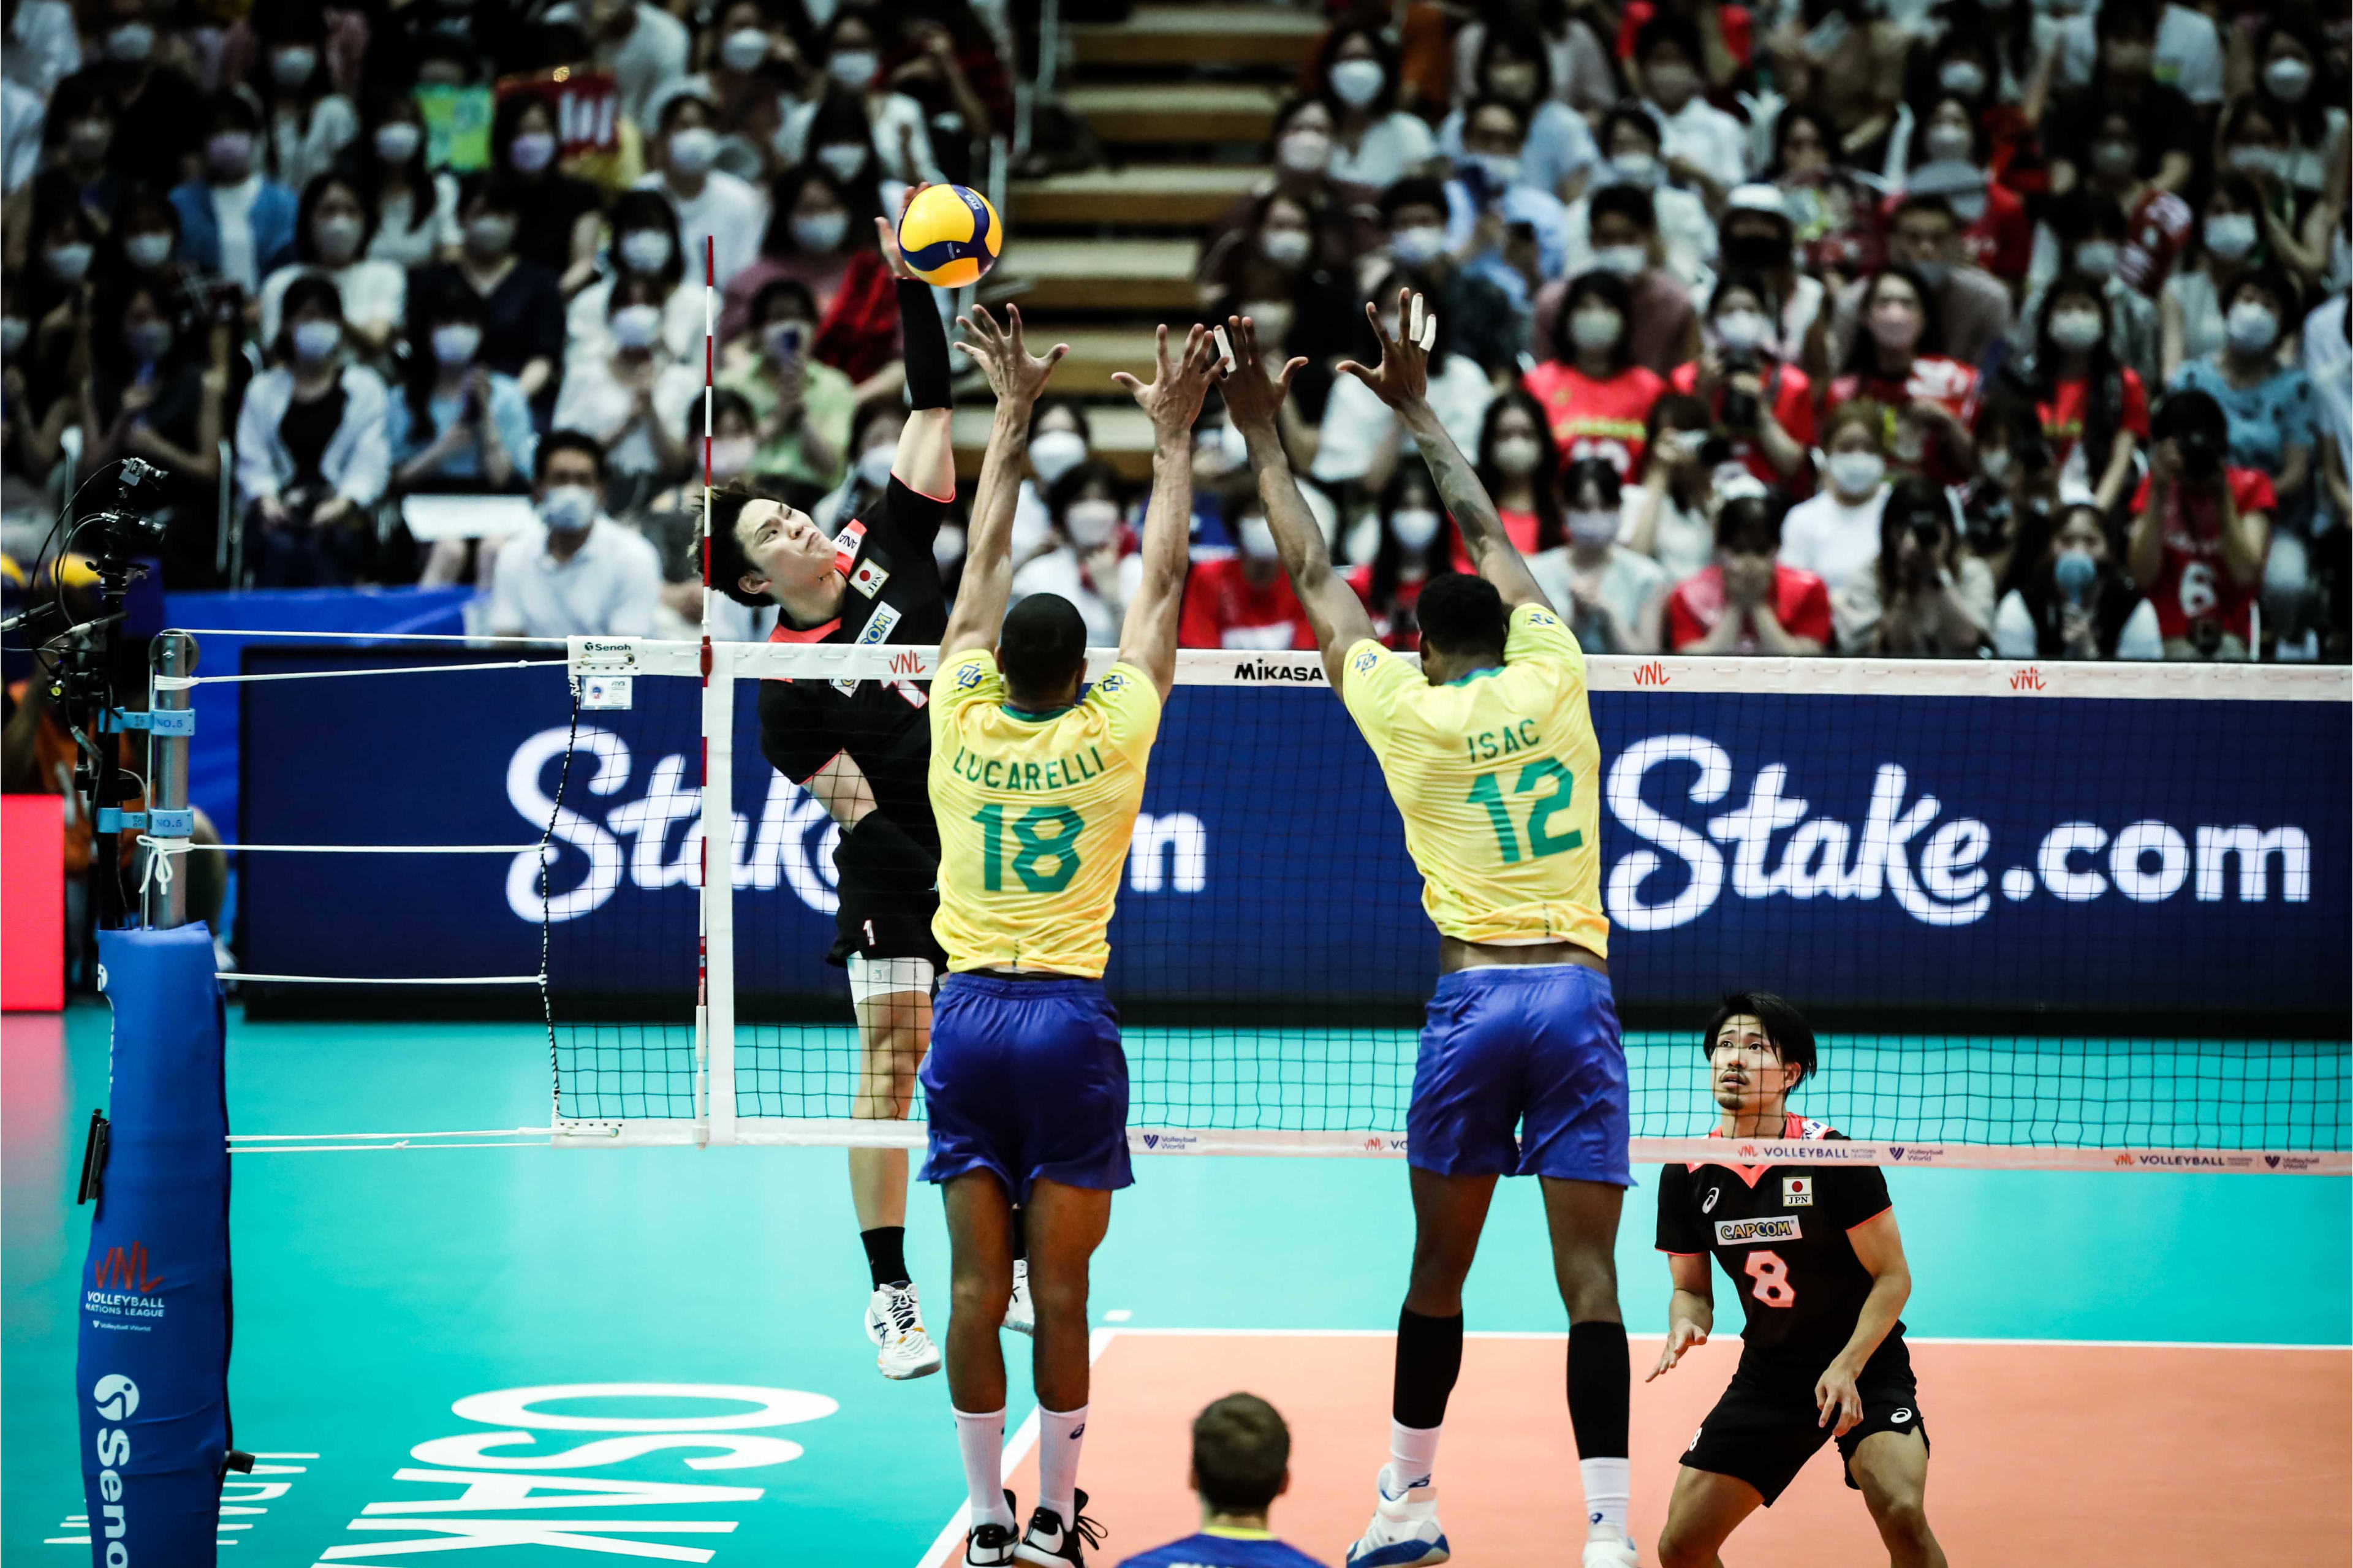 Volleyball World and Stake agree on new 2023 partnership volleyballworld